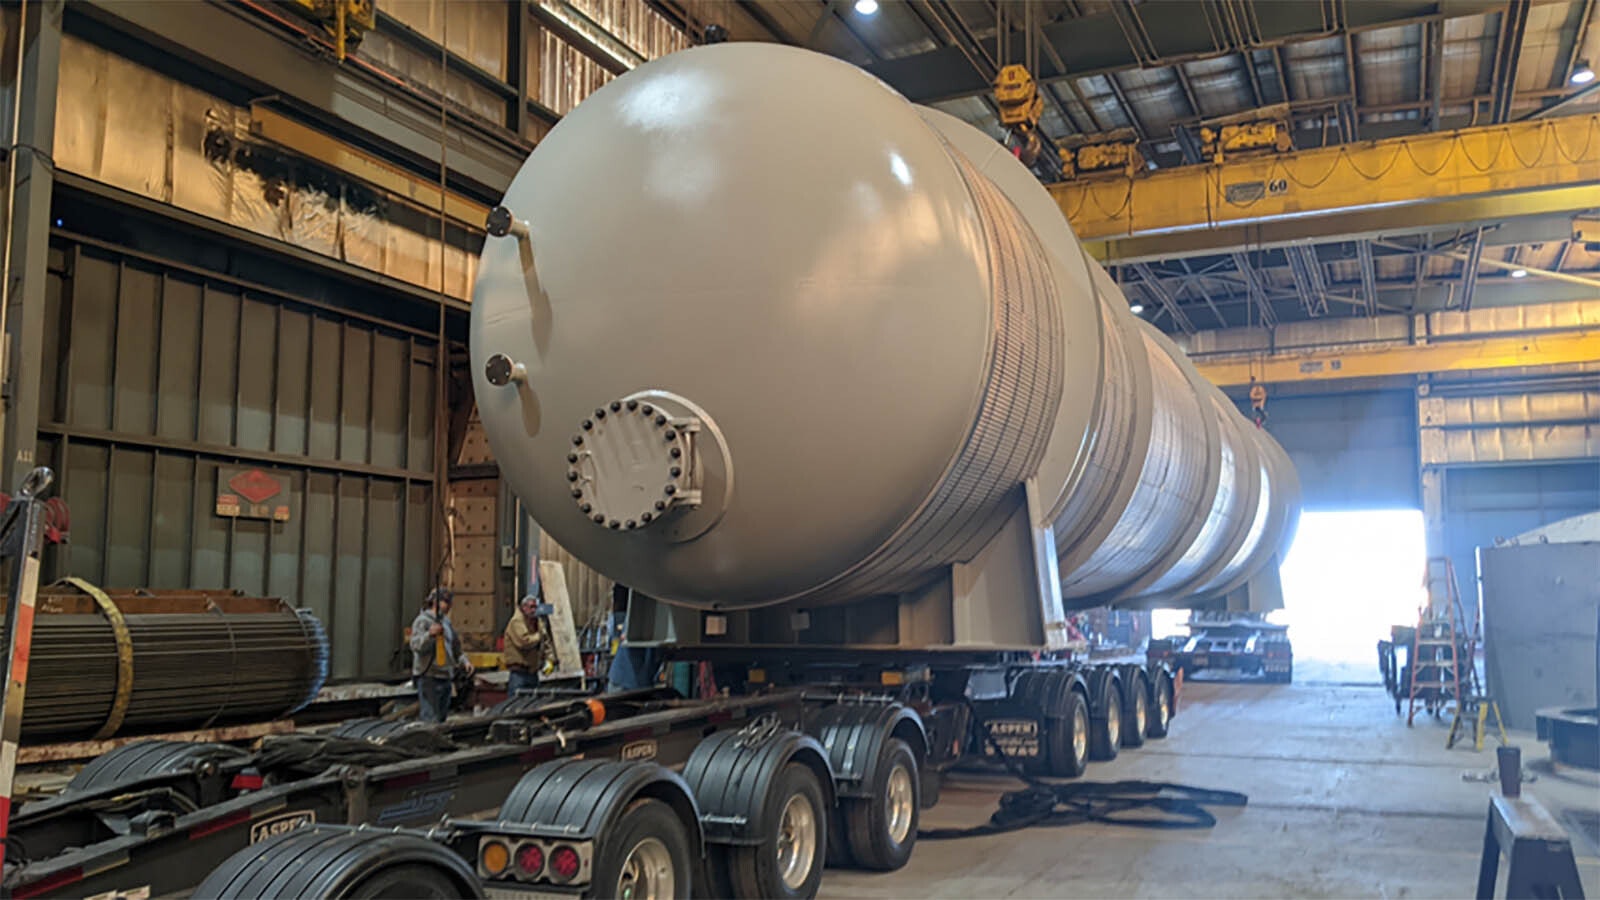 A big vessel destined for a carbon capture facility is readied to be trucked out of the plant.